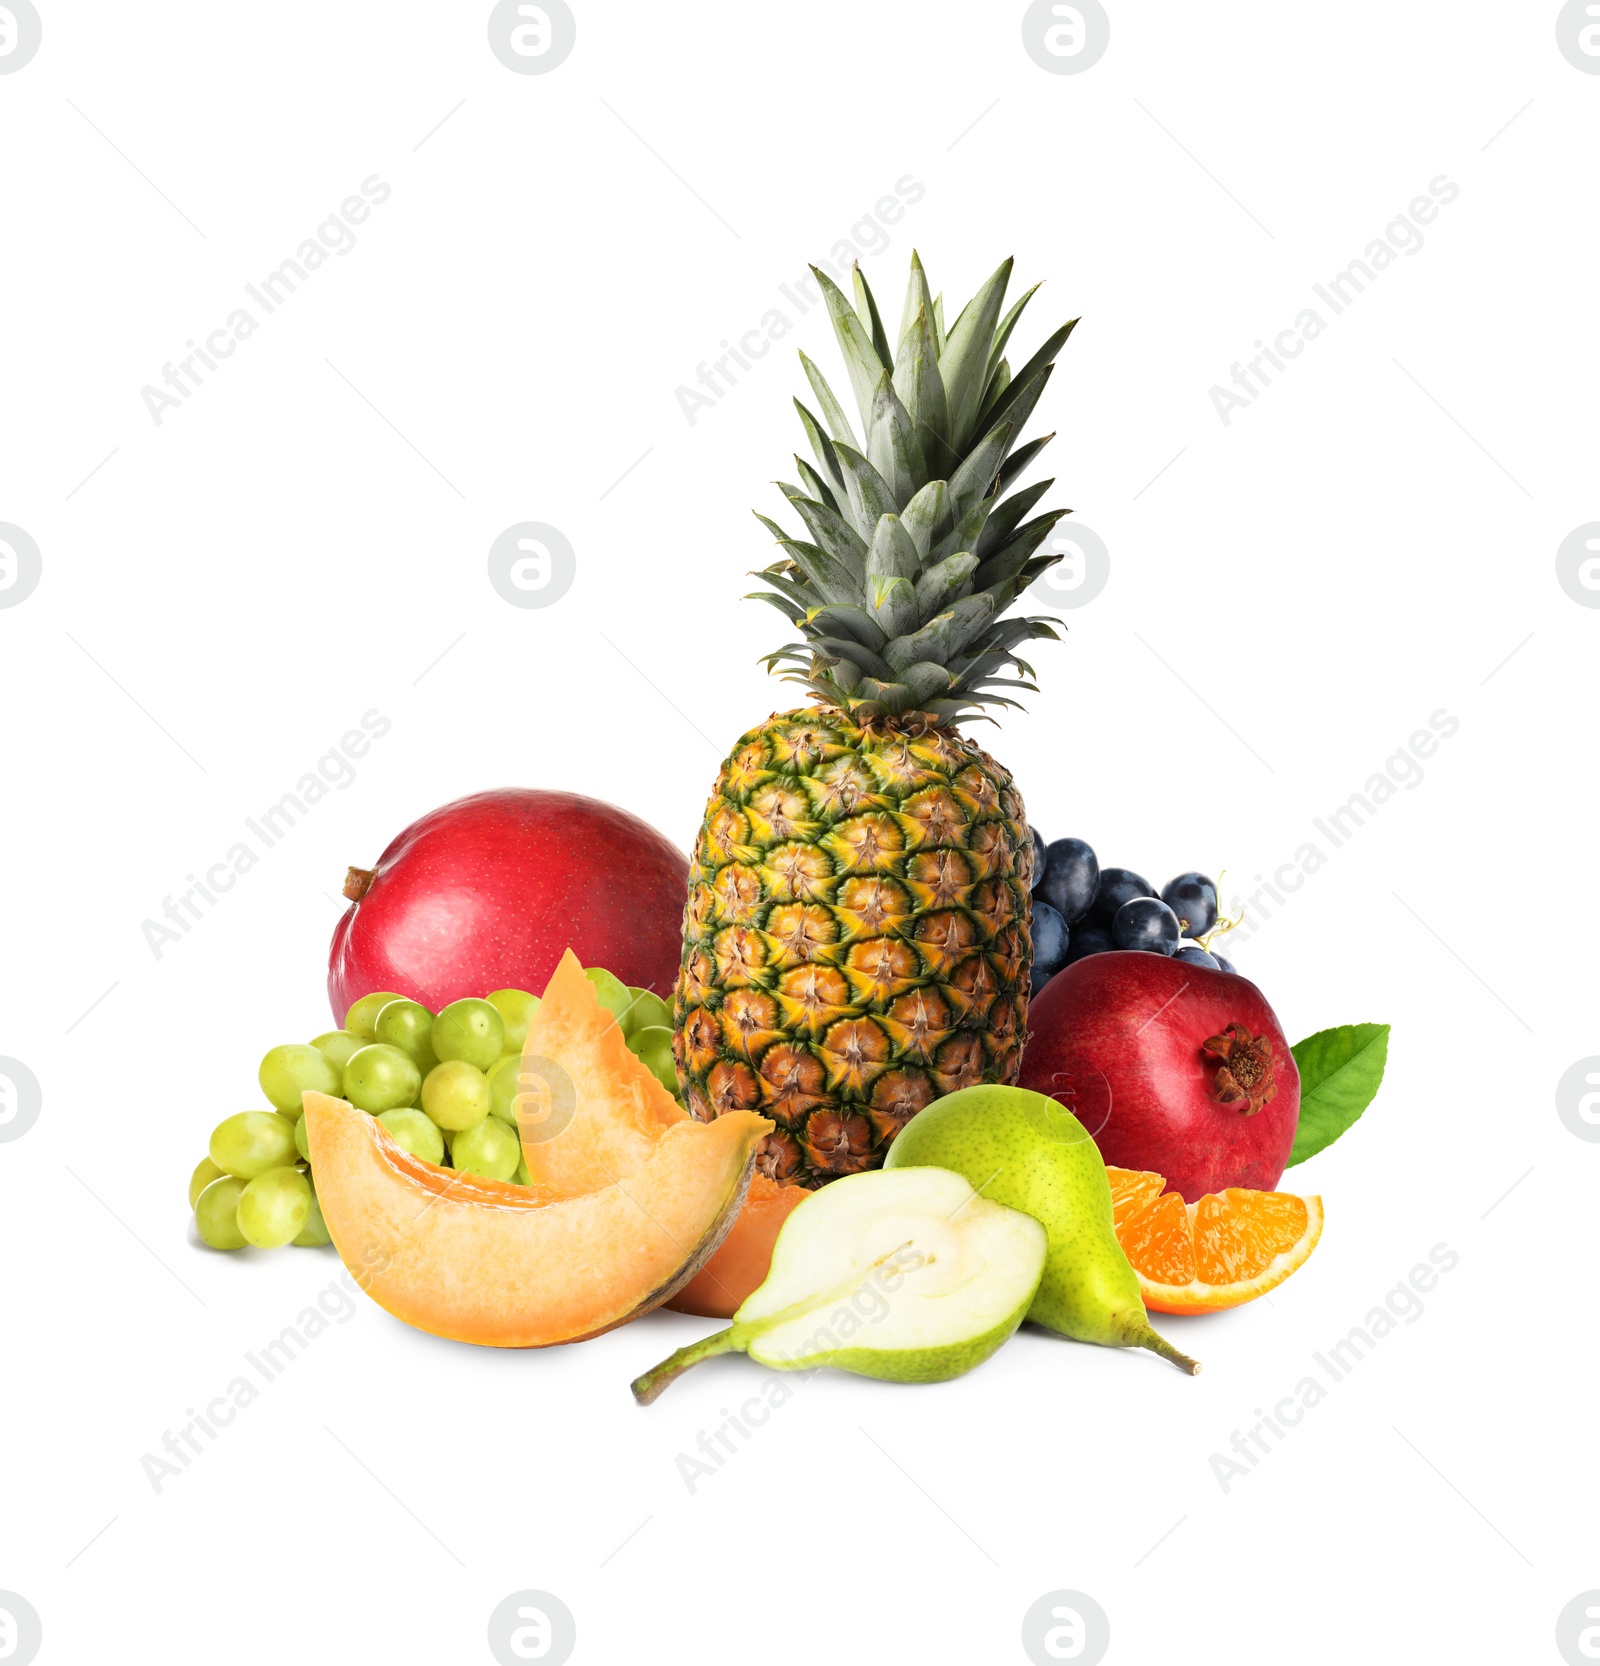 Image of Different ripe juicy fruits on white background